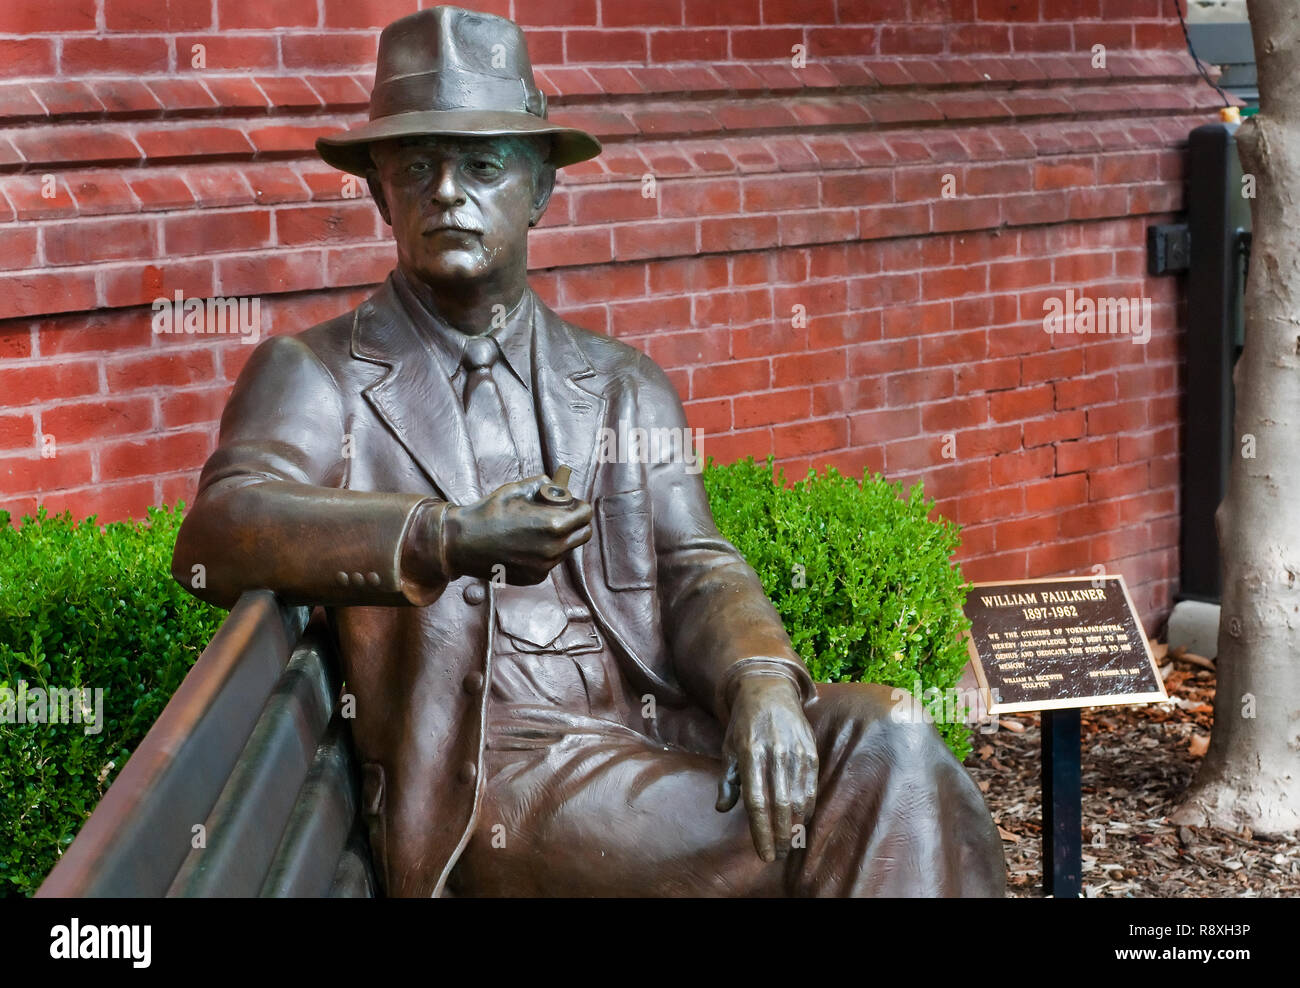 A bronze statue of William Faulkner looks out over Courthouse Square, July 17, 2011, in Oxford, Mississippi. Stock Photo